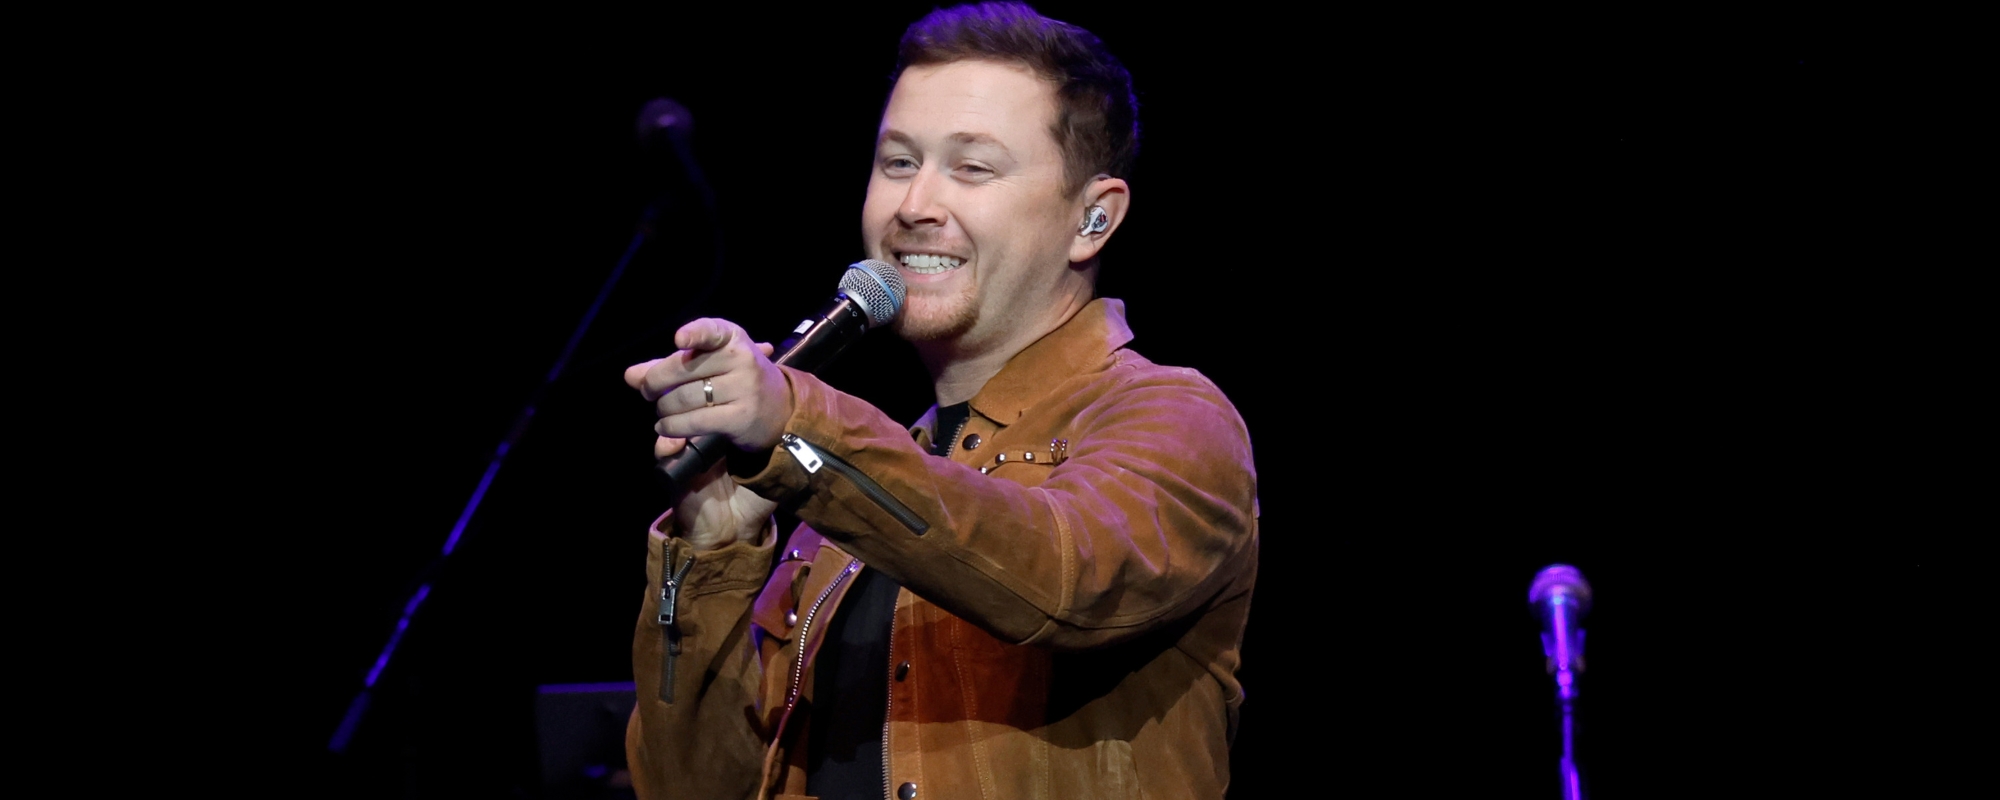 Former ‘American Idol’ Winner Scotty McCreery Lights Up the Stage in Return Performance